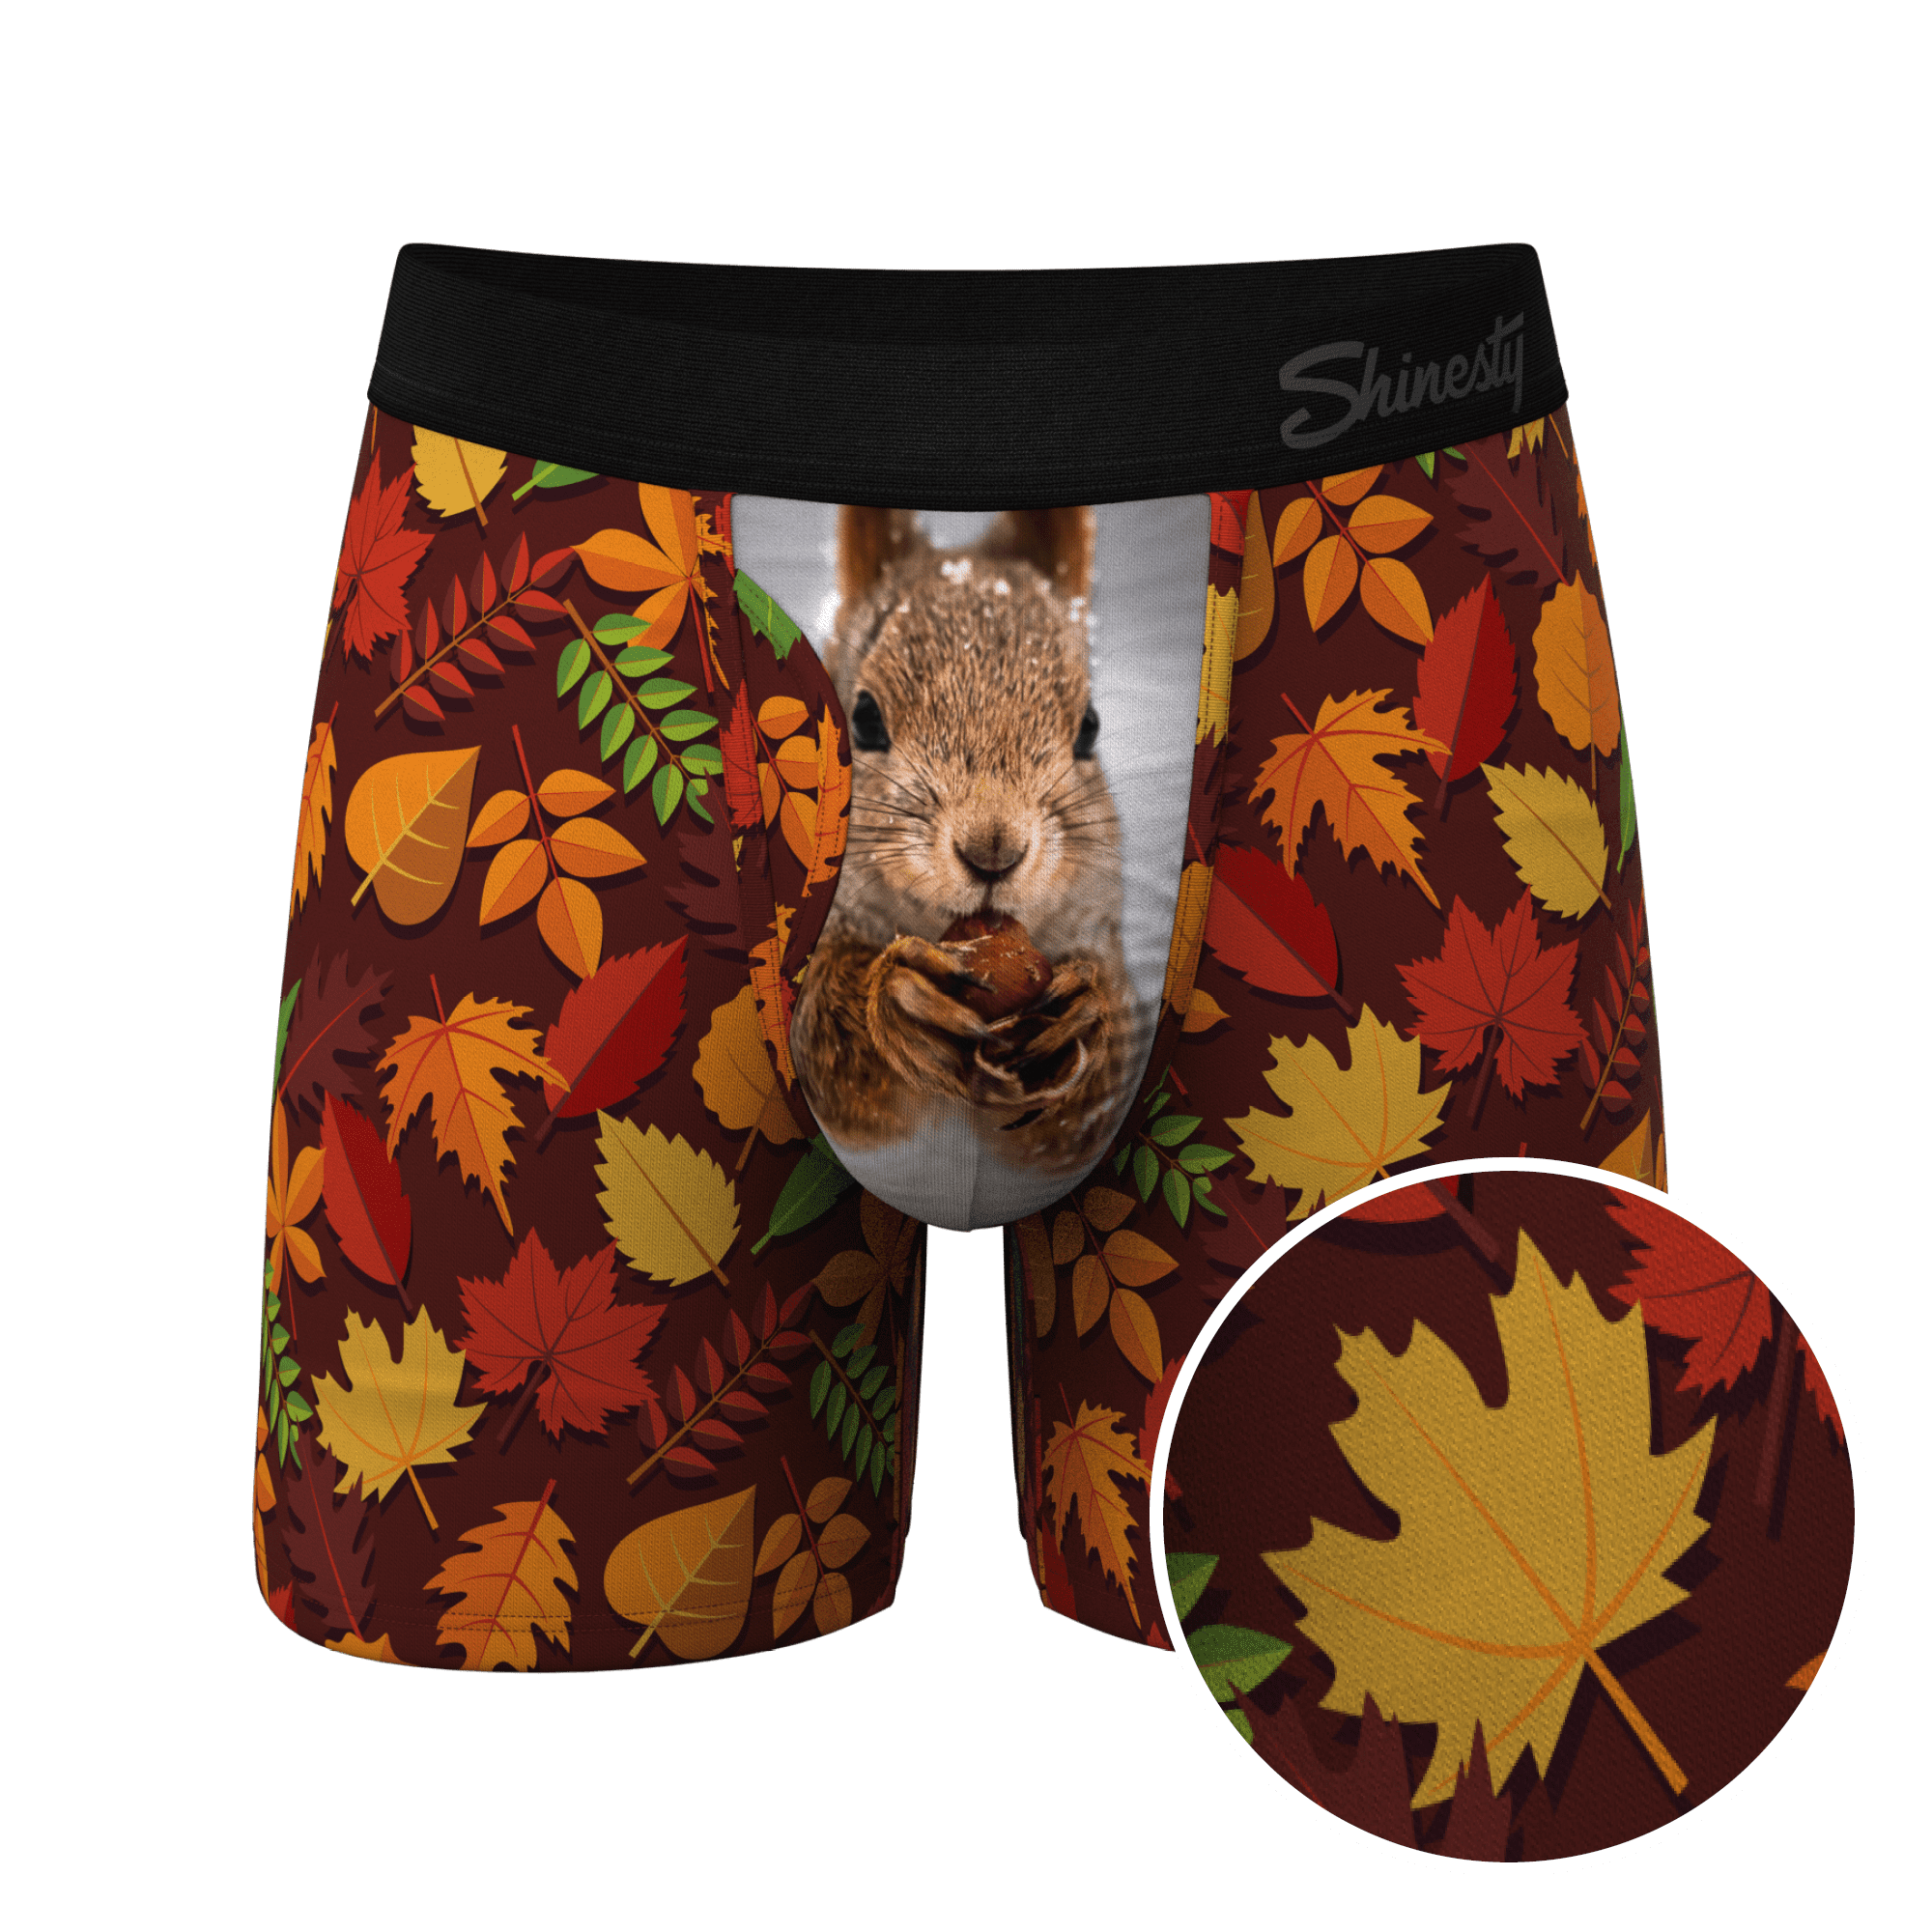 The Acorn Hoard - Shinesty Squirrel Ball Hammock Pouch Underwear With Fly  2X 